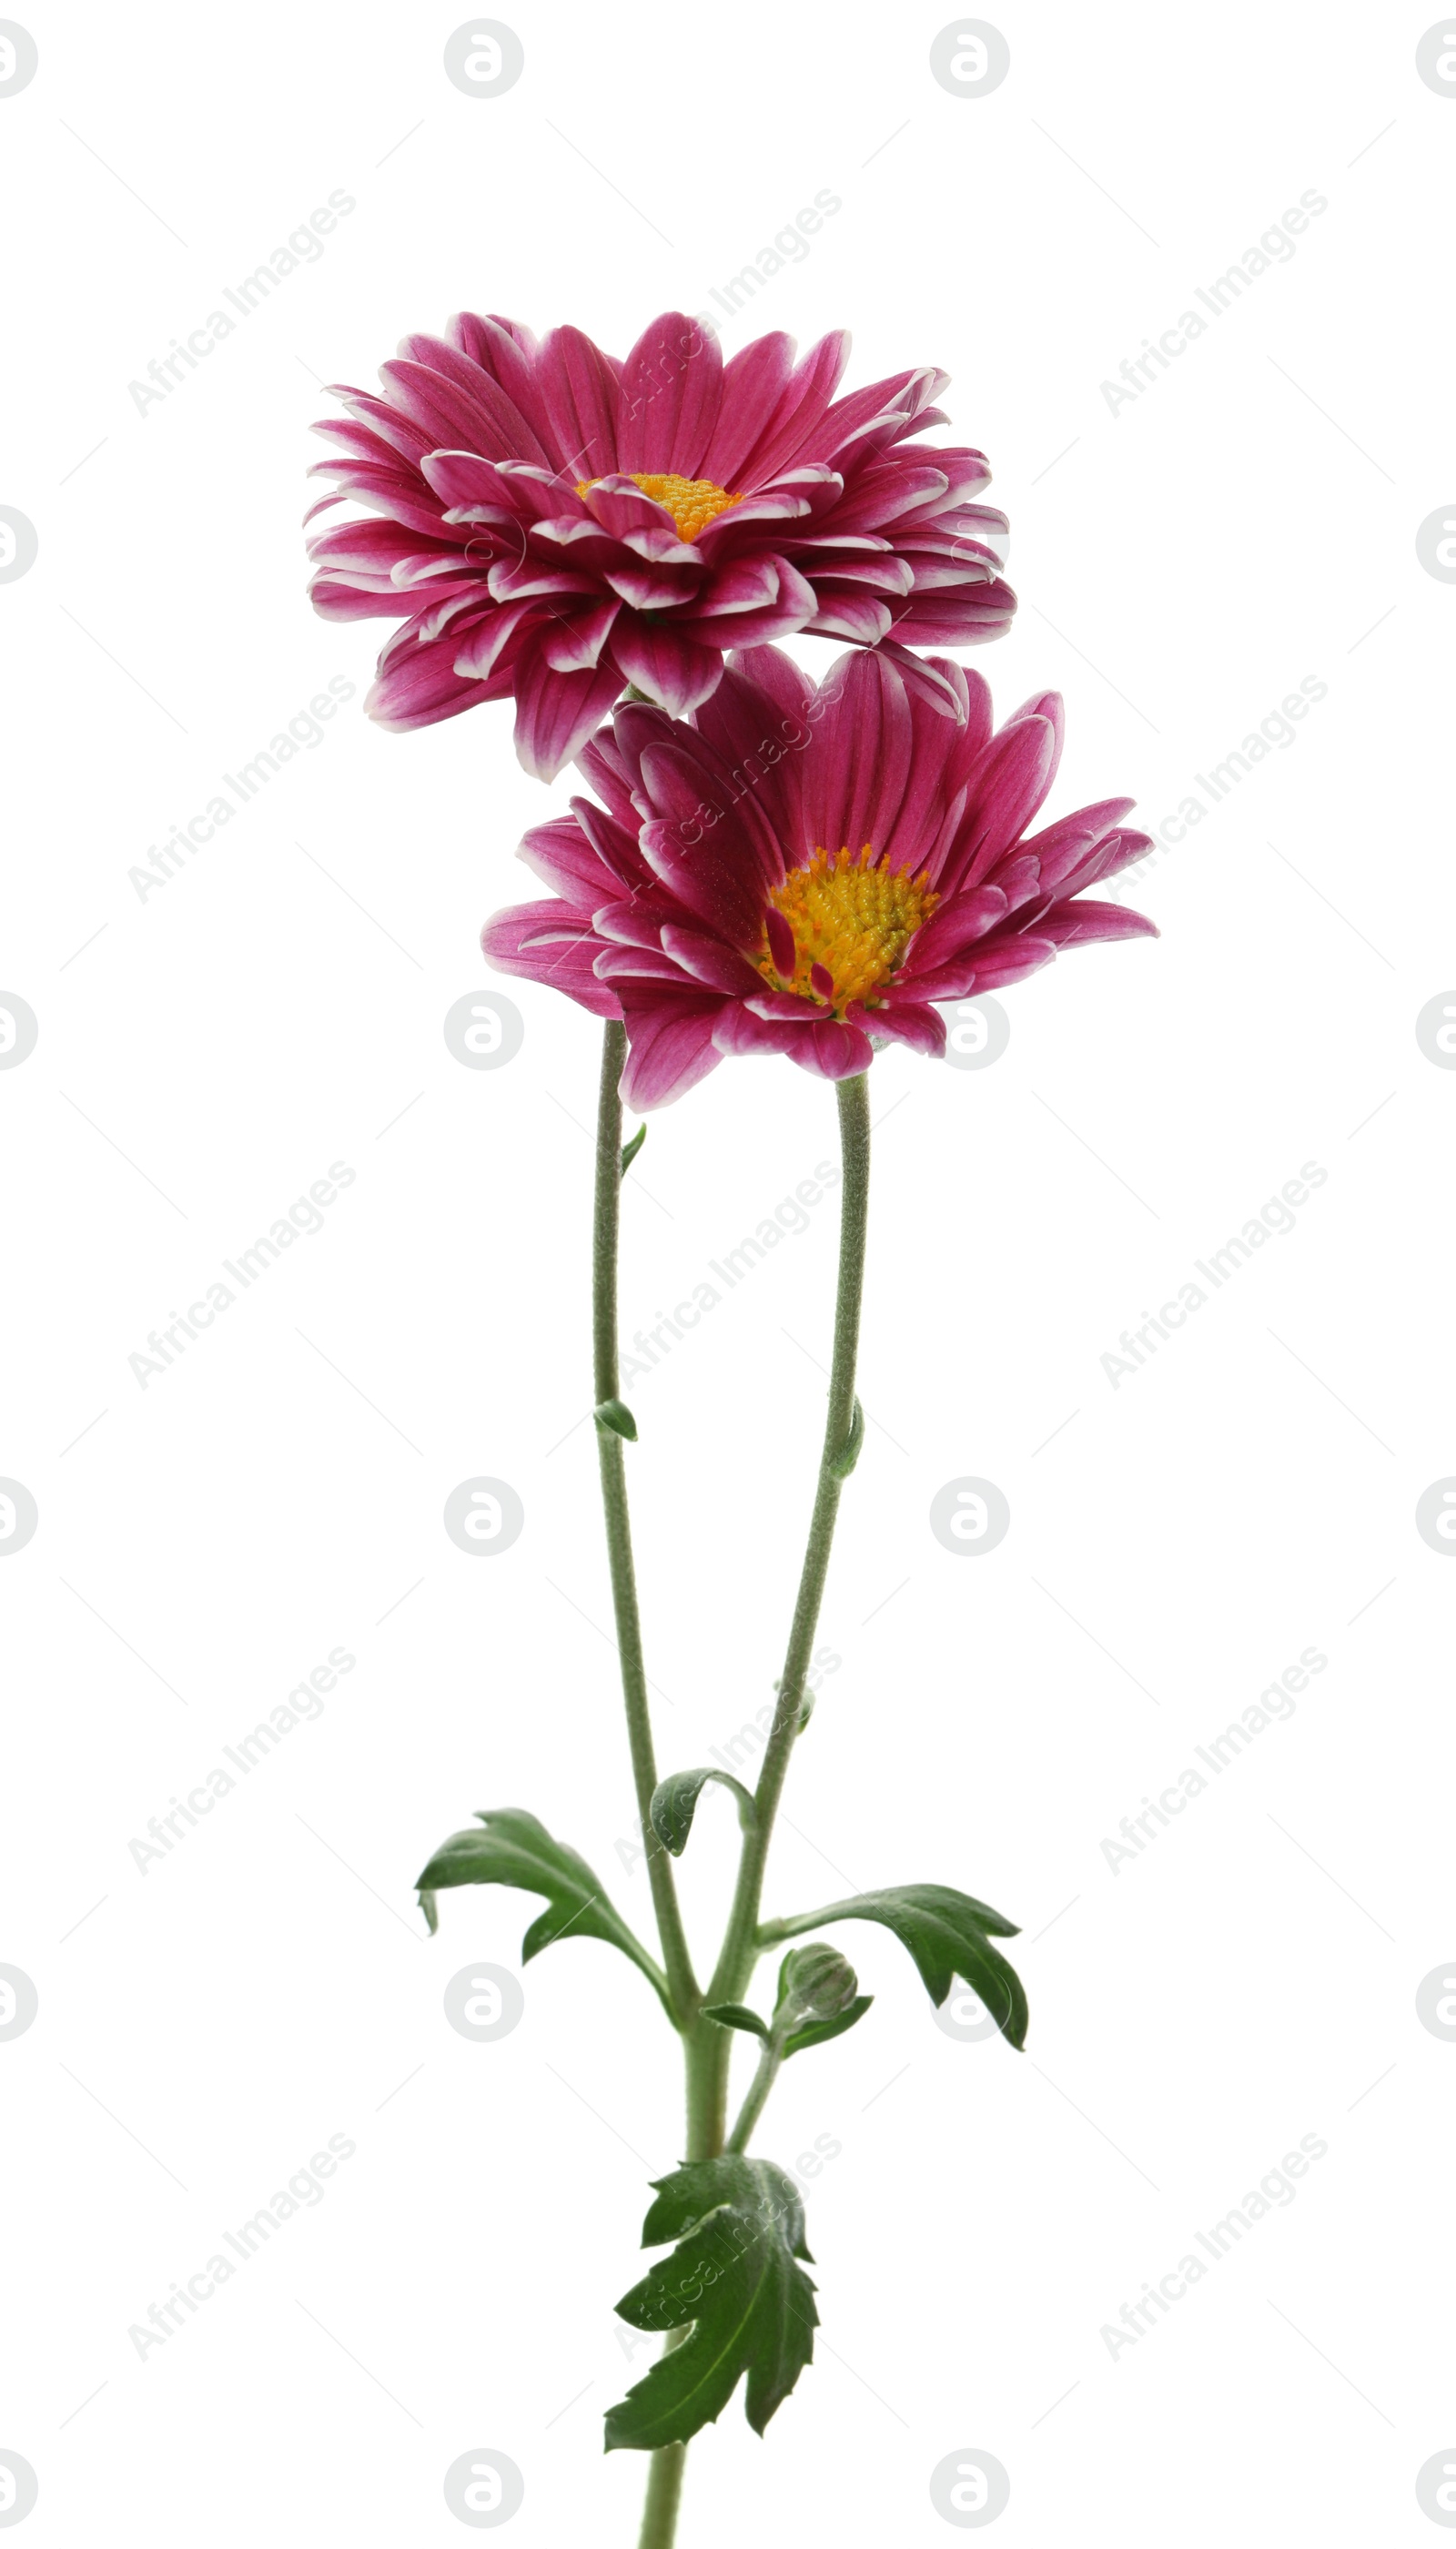 Photo of Chrysanthemum plant with beautiful flowers isolated on white